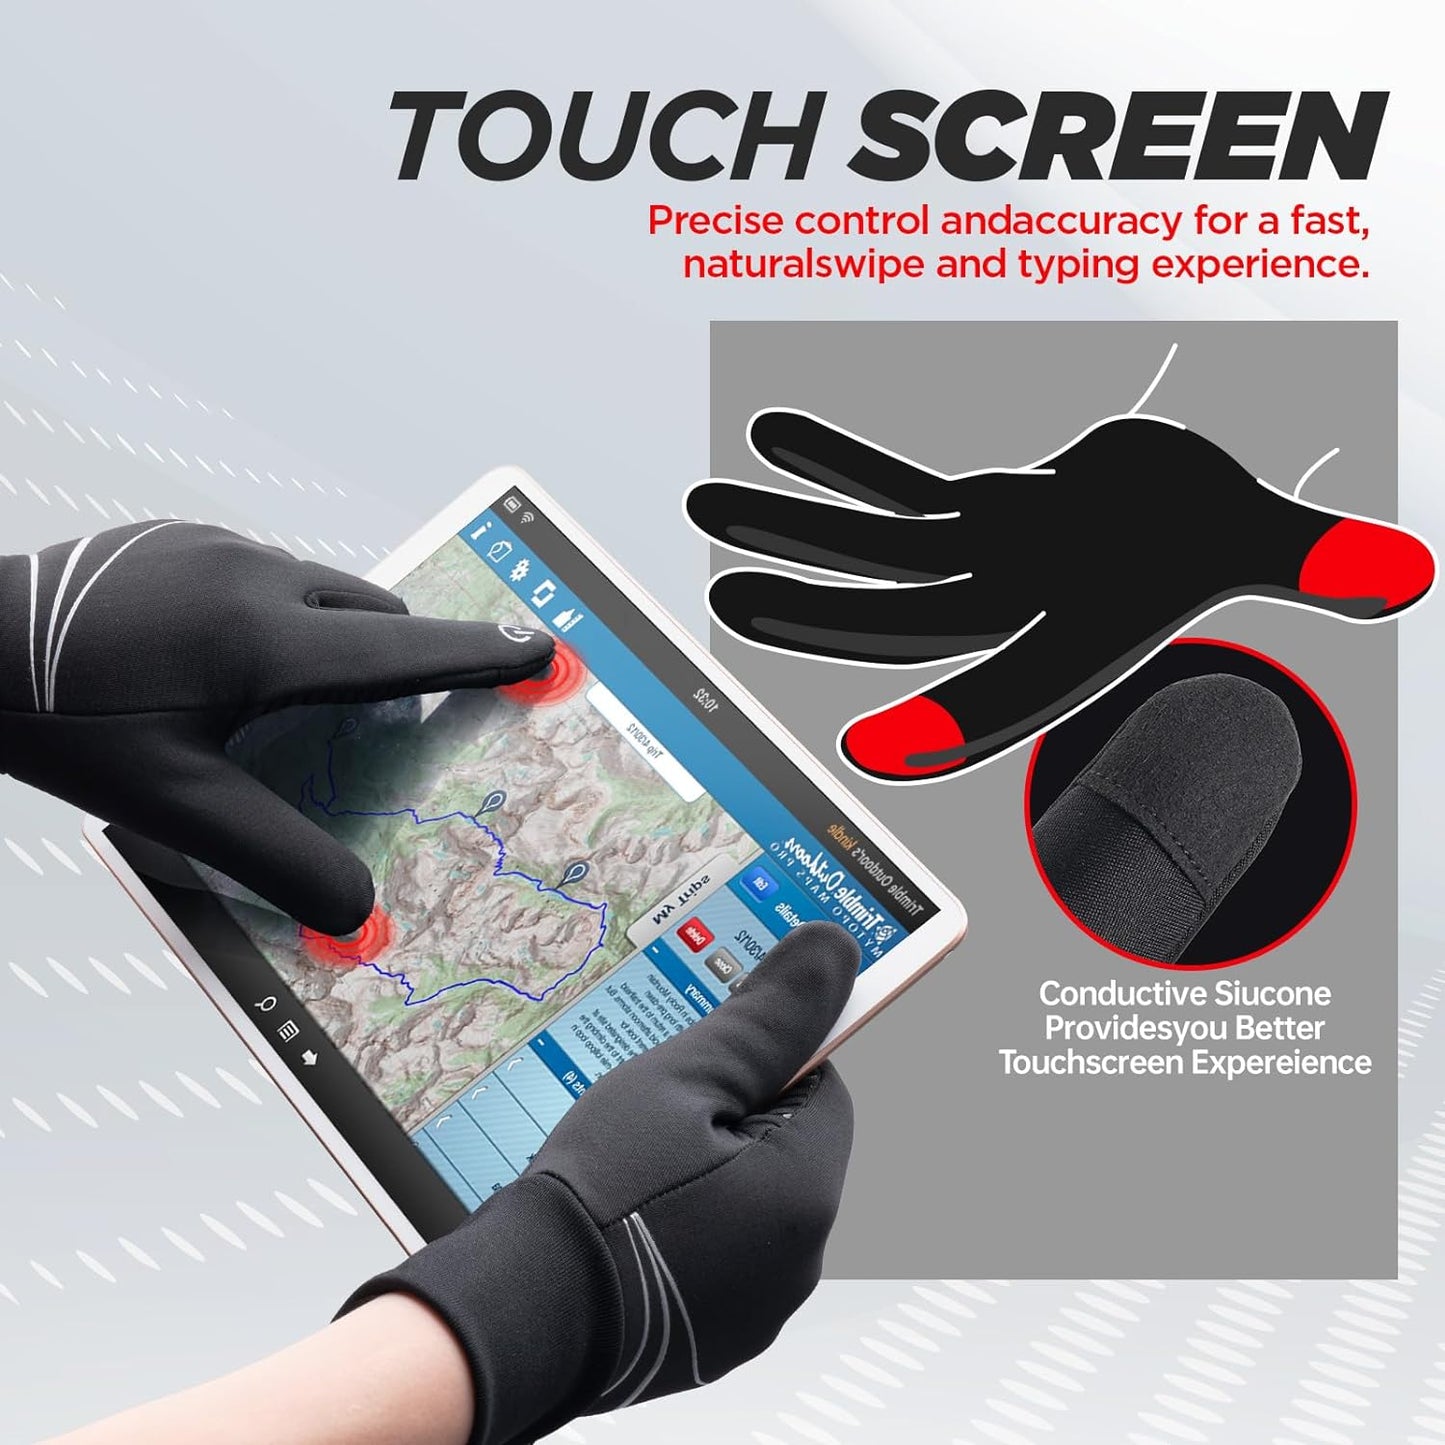 Thermal Gloves for Men Women, Winter Windproof Anti-Slip Touch Screen Running Gloves for Driving Riding Cycling Hiking